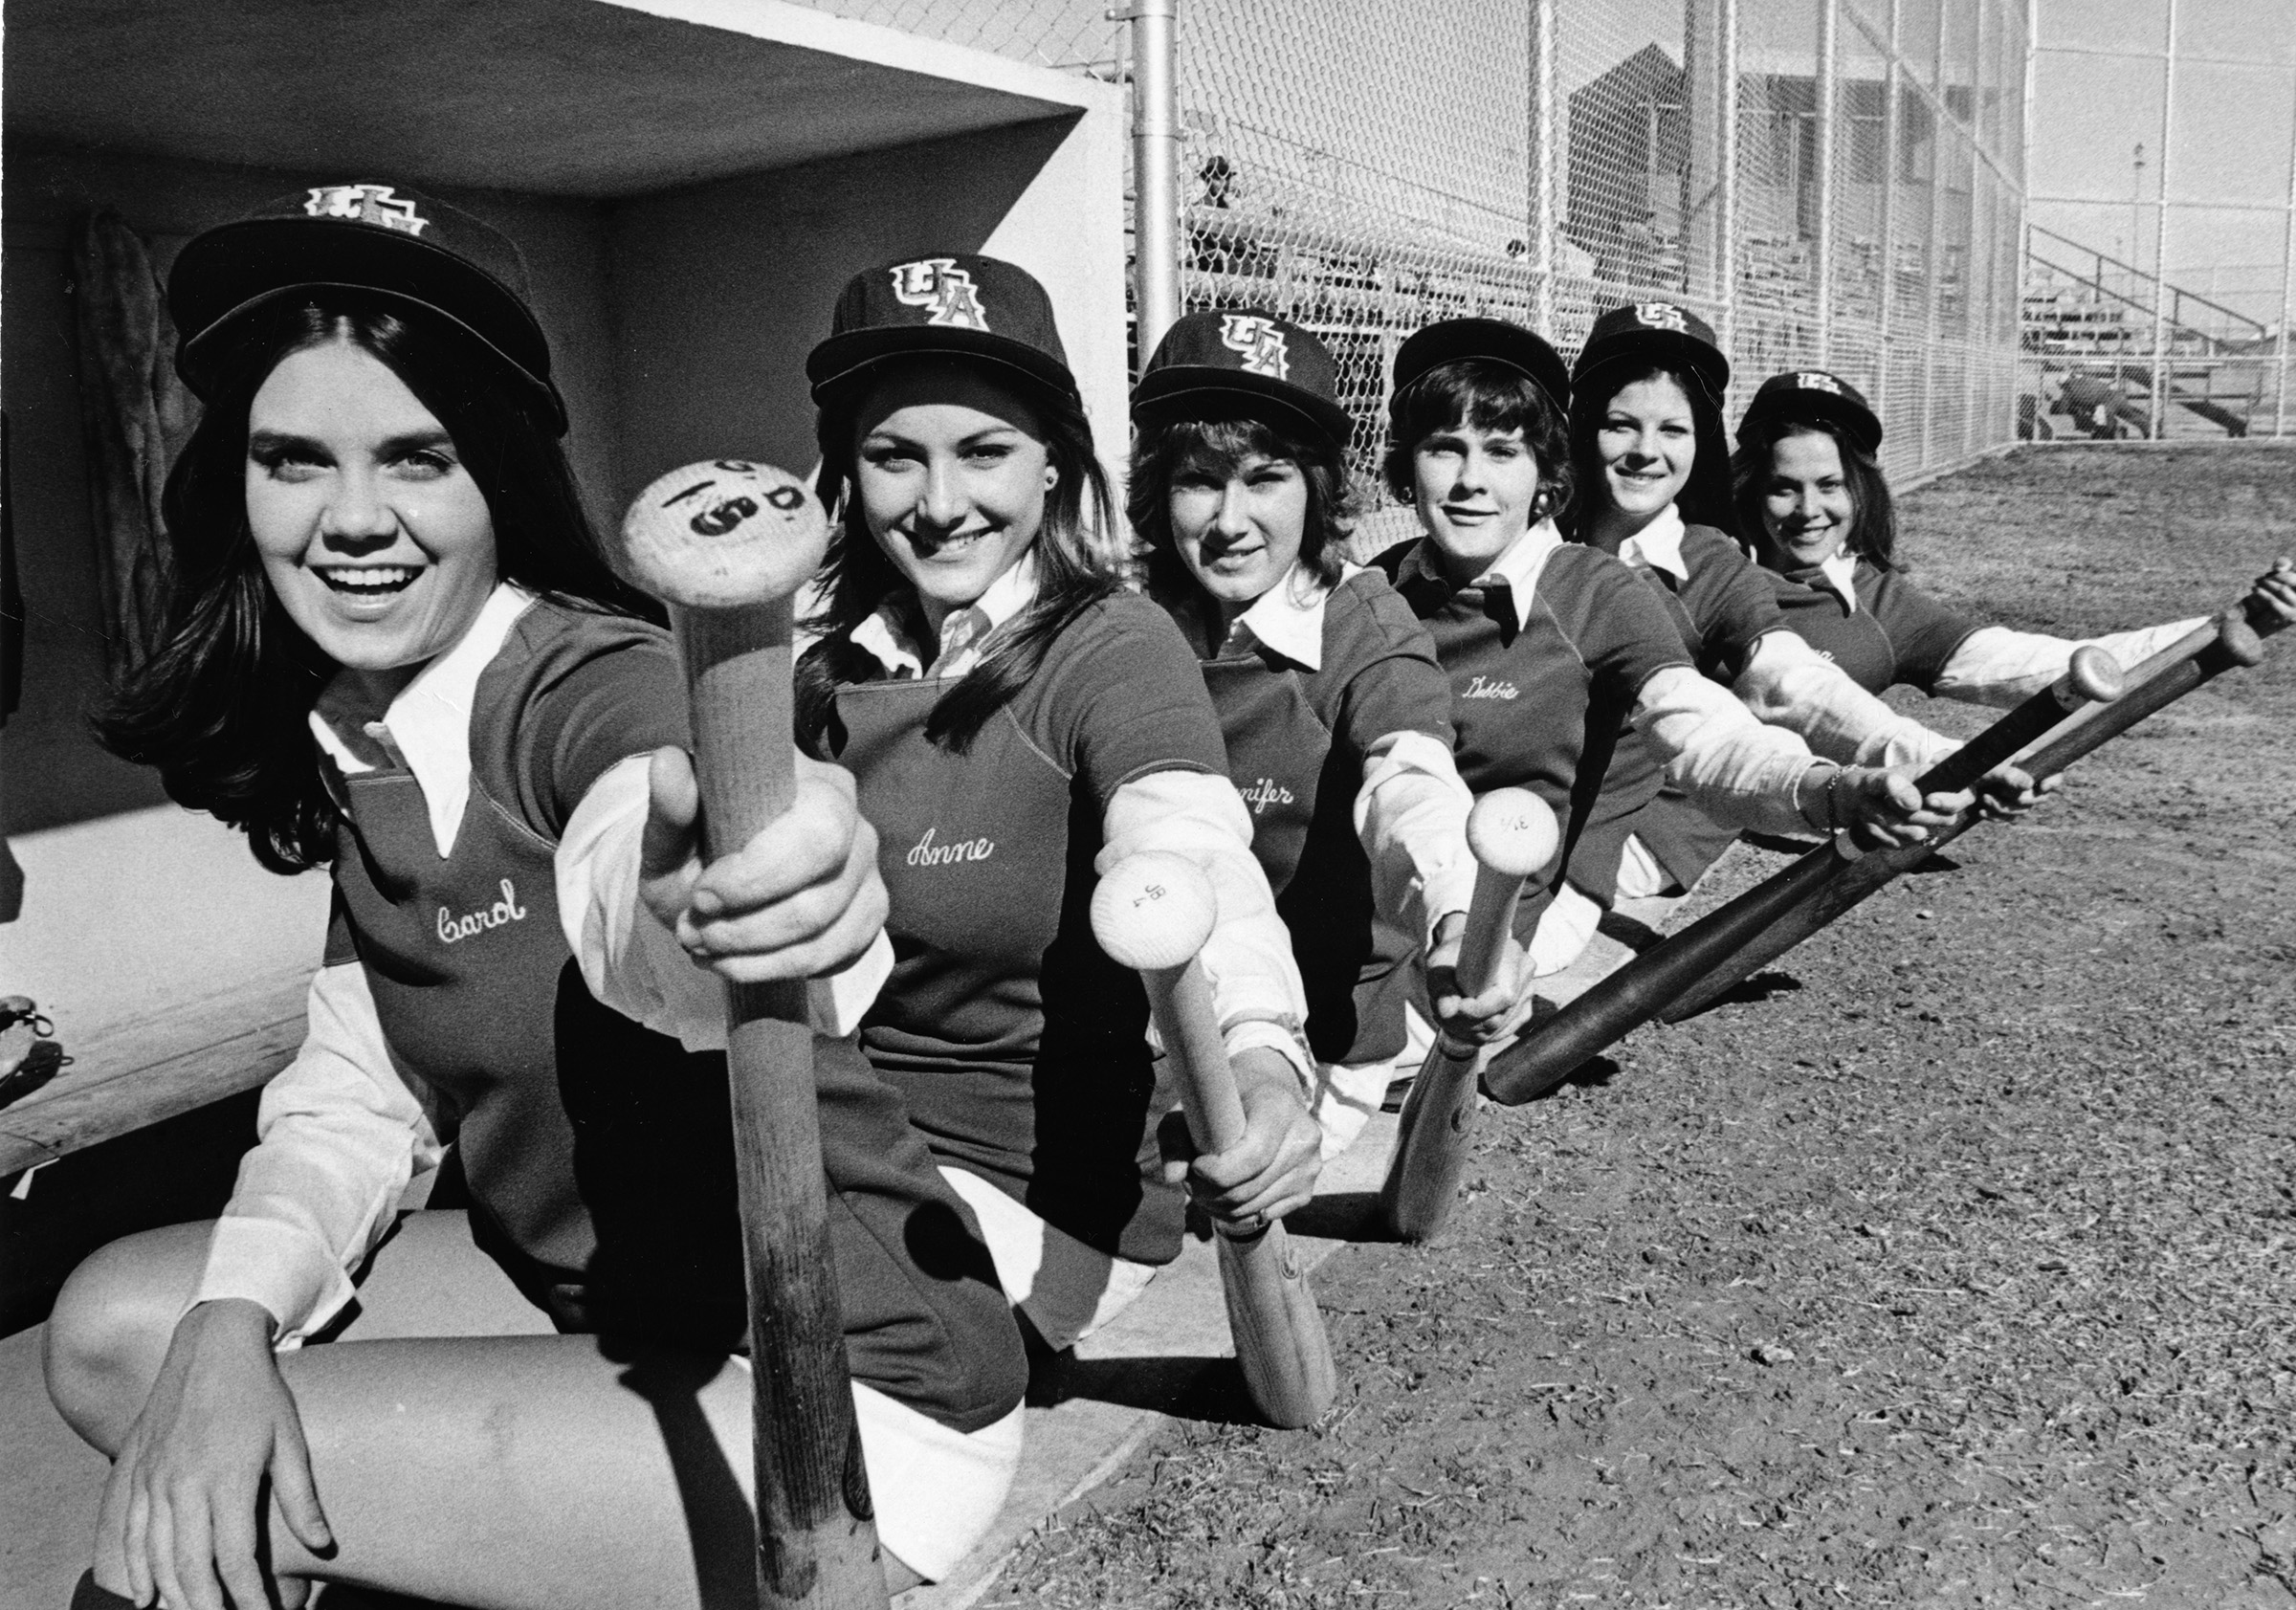 Black and white photo of a group of softball players posed sitting in a dugout holding bats and looking towards the camera.